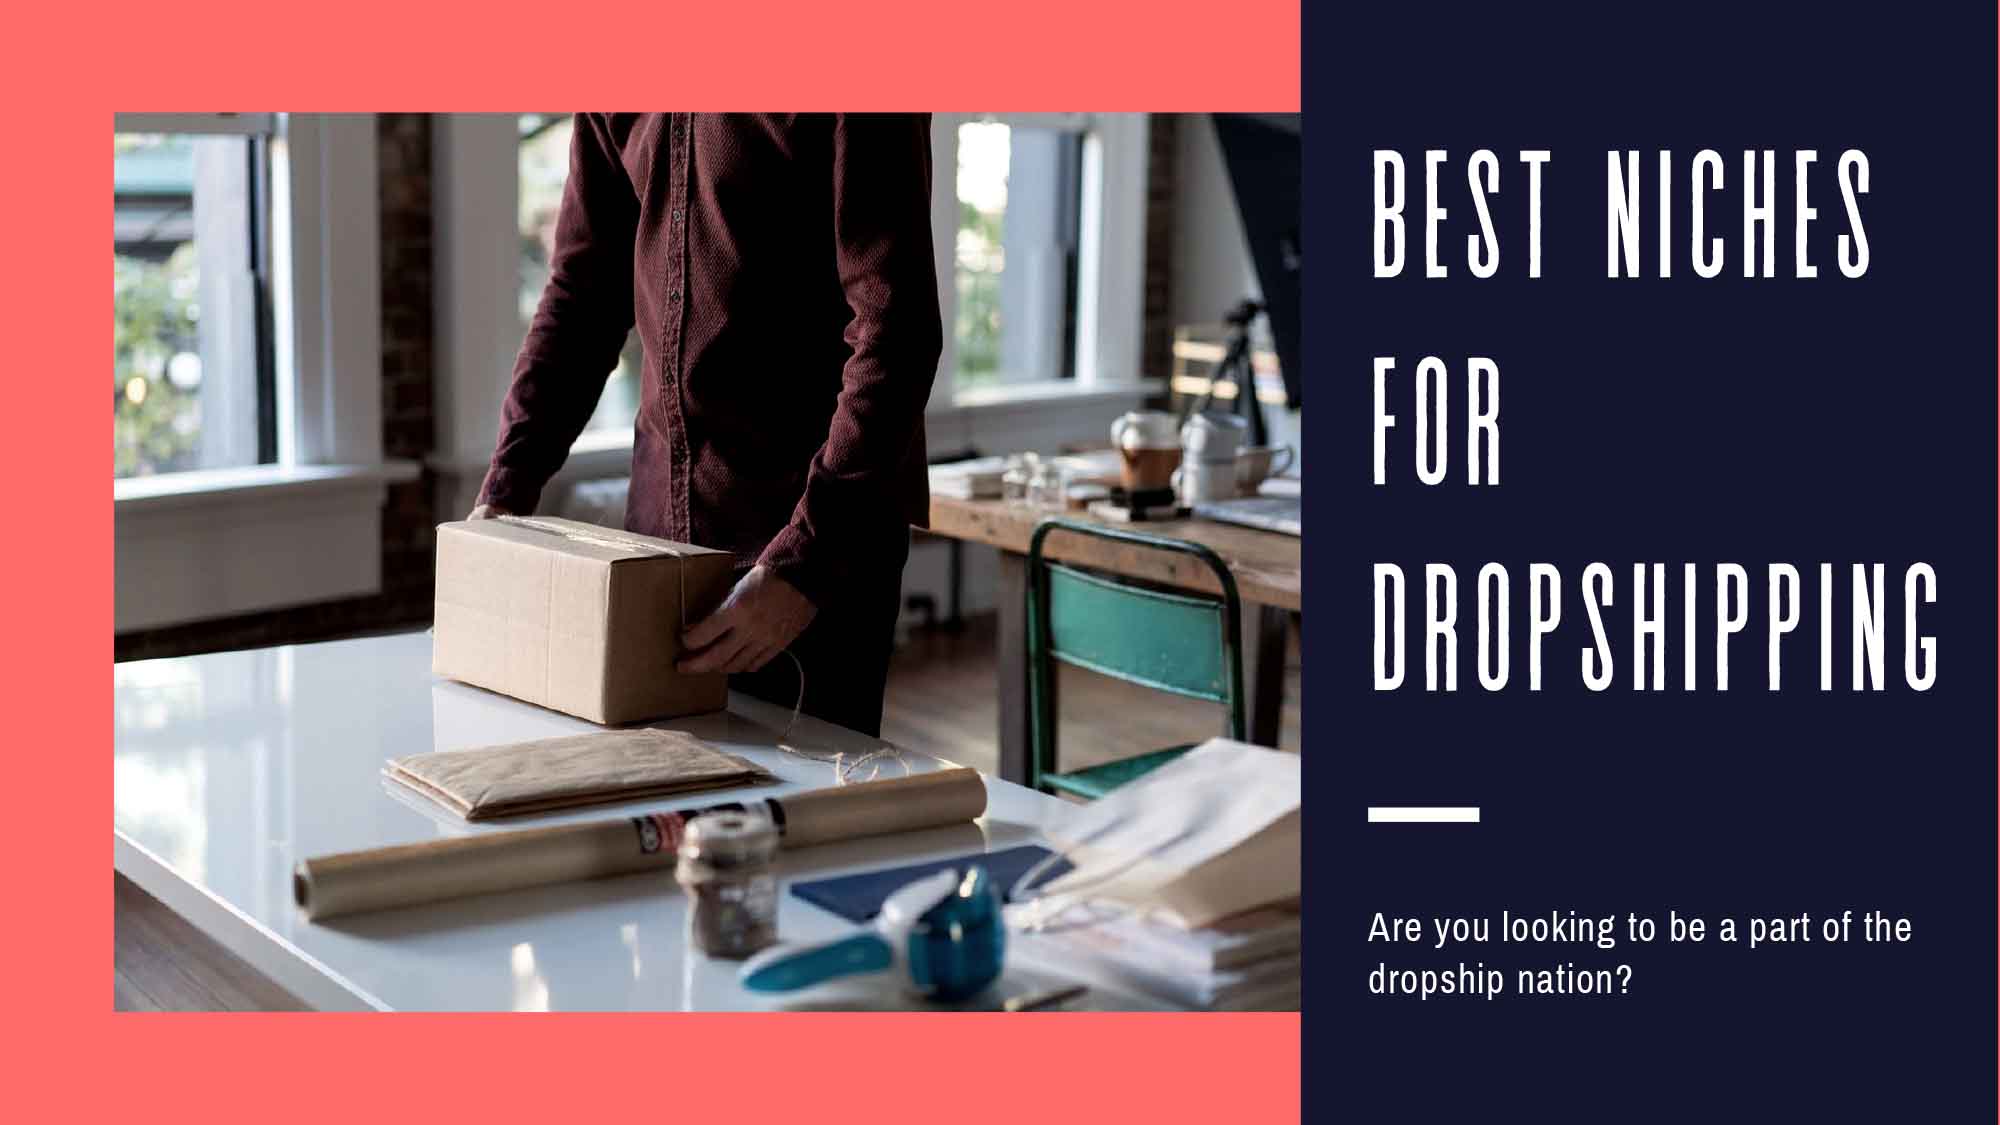 Best Niches For Dropshipping & How to The Best Dropshipping Ideas!